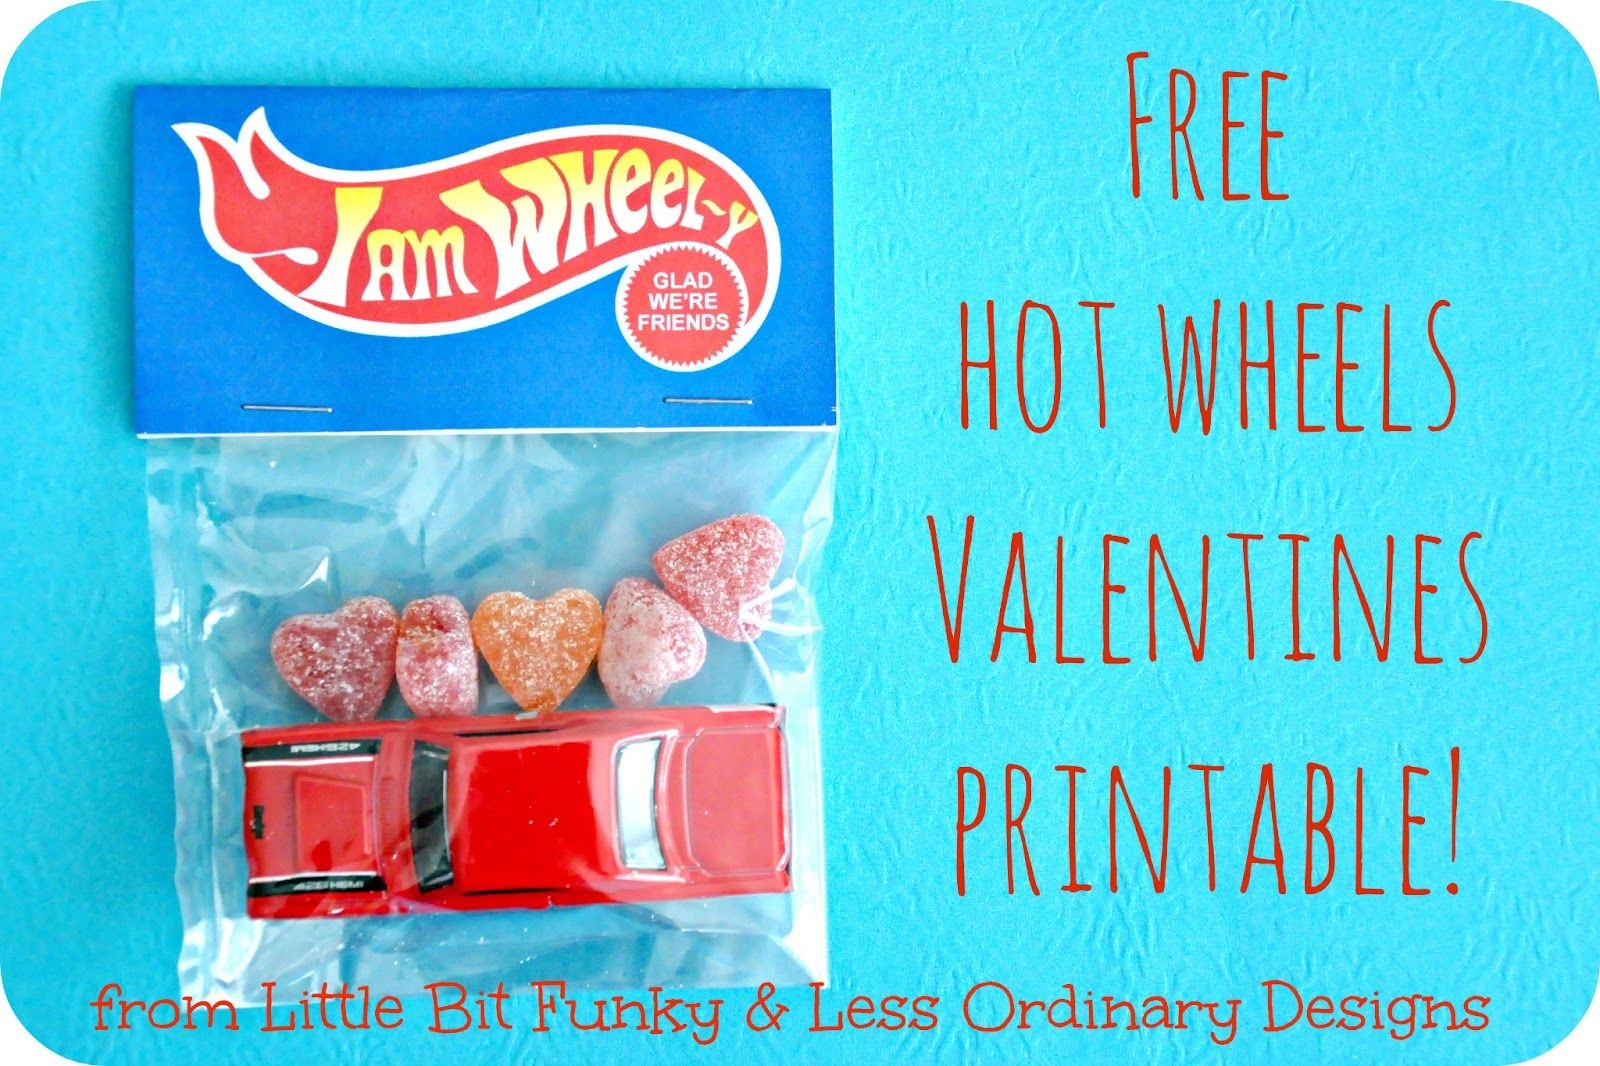 Free Hotwheels Printable Valentines For Boys Valentines For Boys Valentines Printables Free Printable Valentines Cards